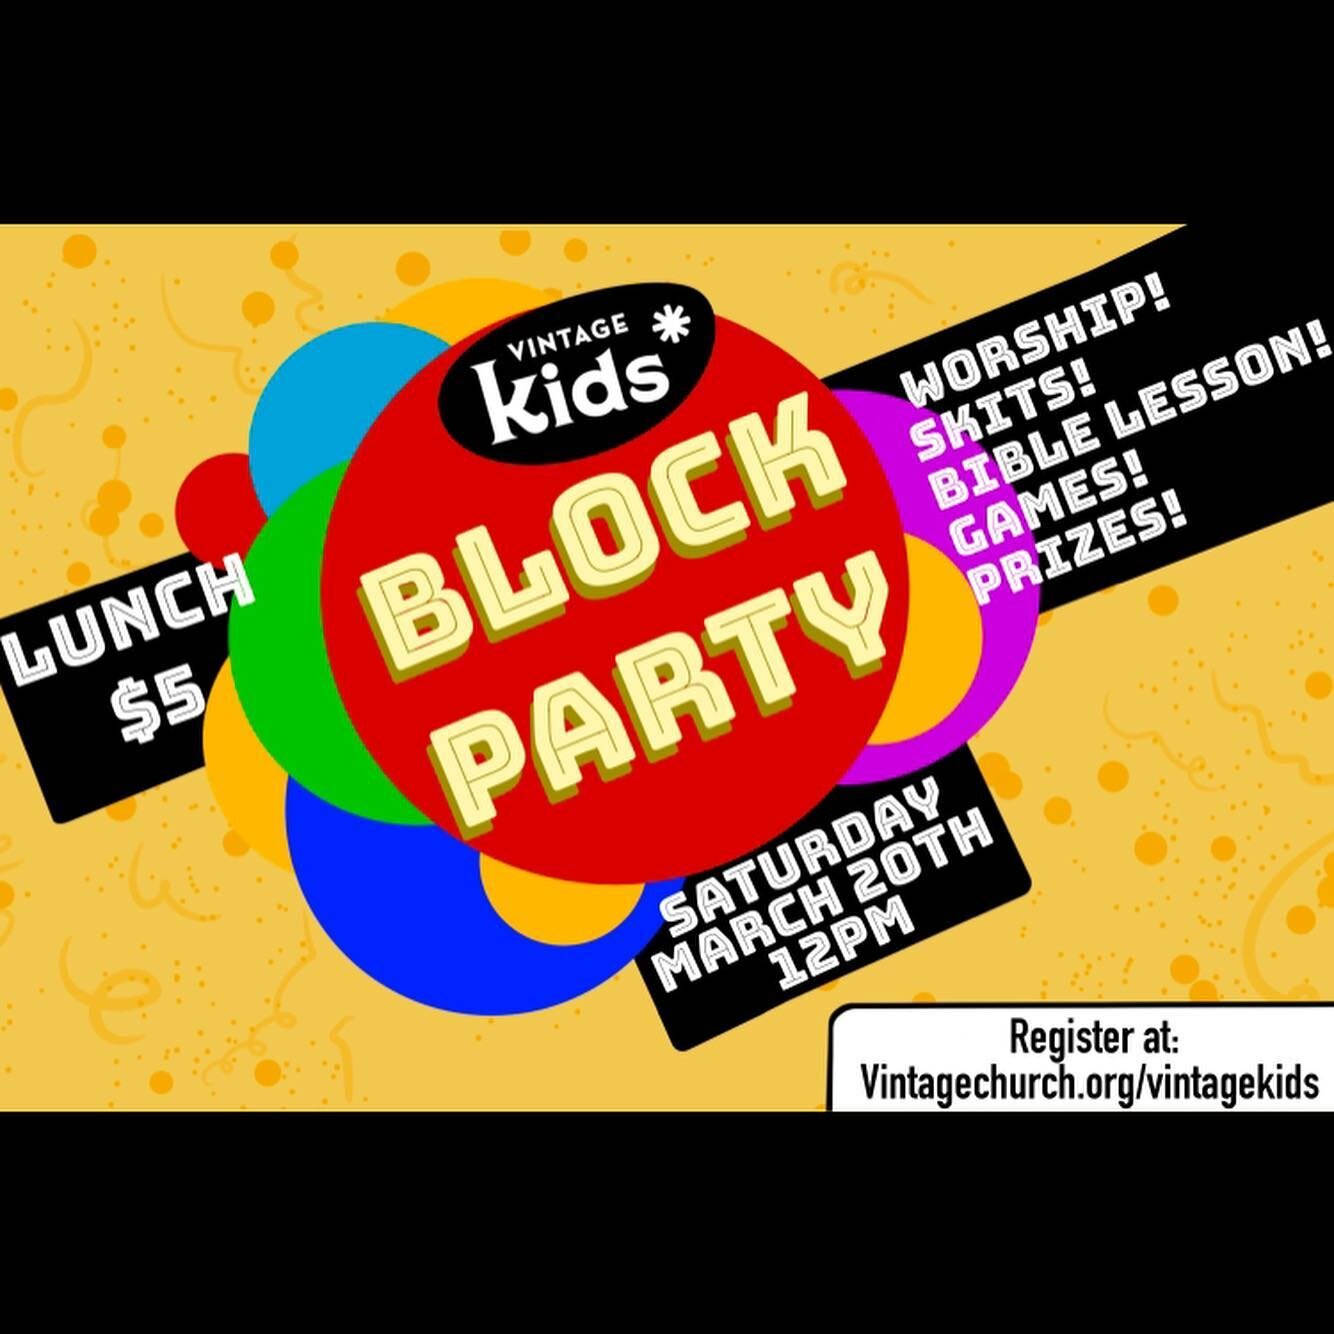 We can&rsquo;t wait for our Block Party on Saturday! Swipe through to see what items we are raffling off in the Vintage Kids Swag Pack! Register today!